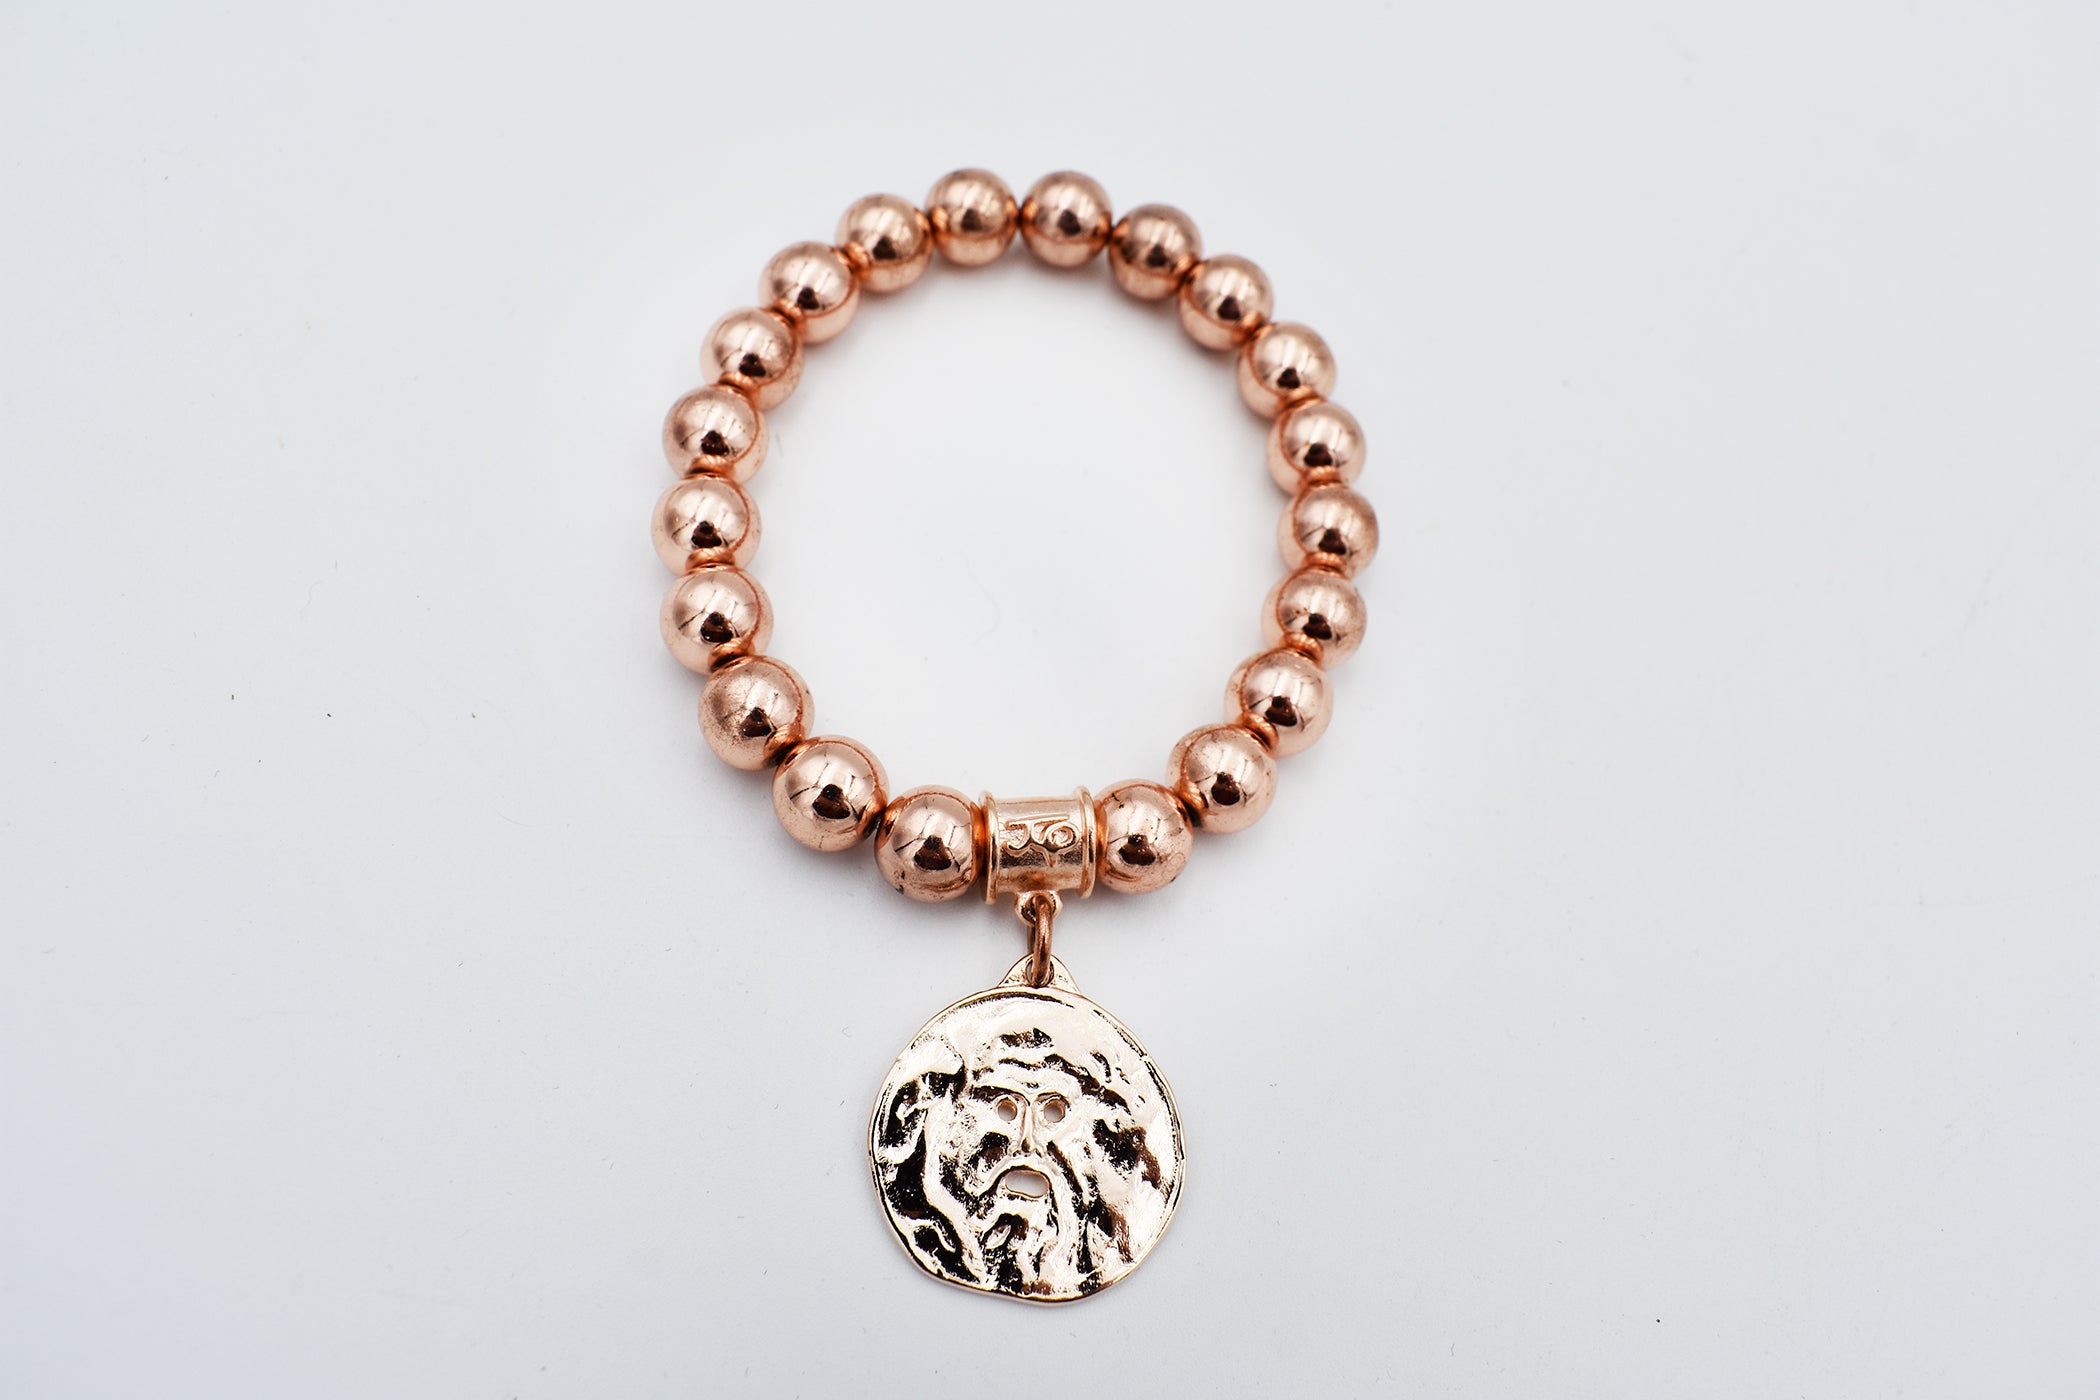 Italian Treasures Collection Mouth of Truths Bracelet